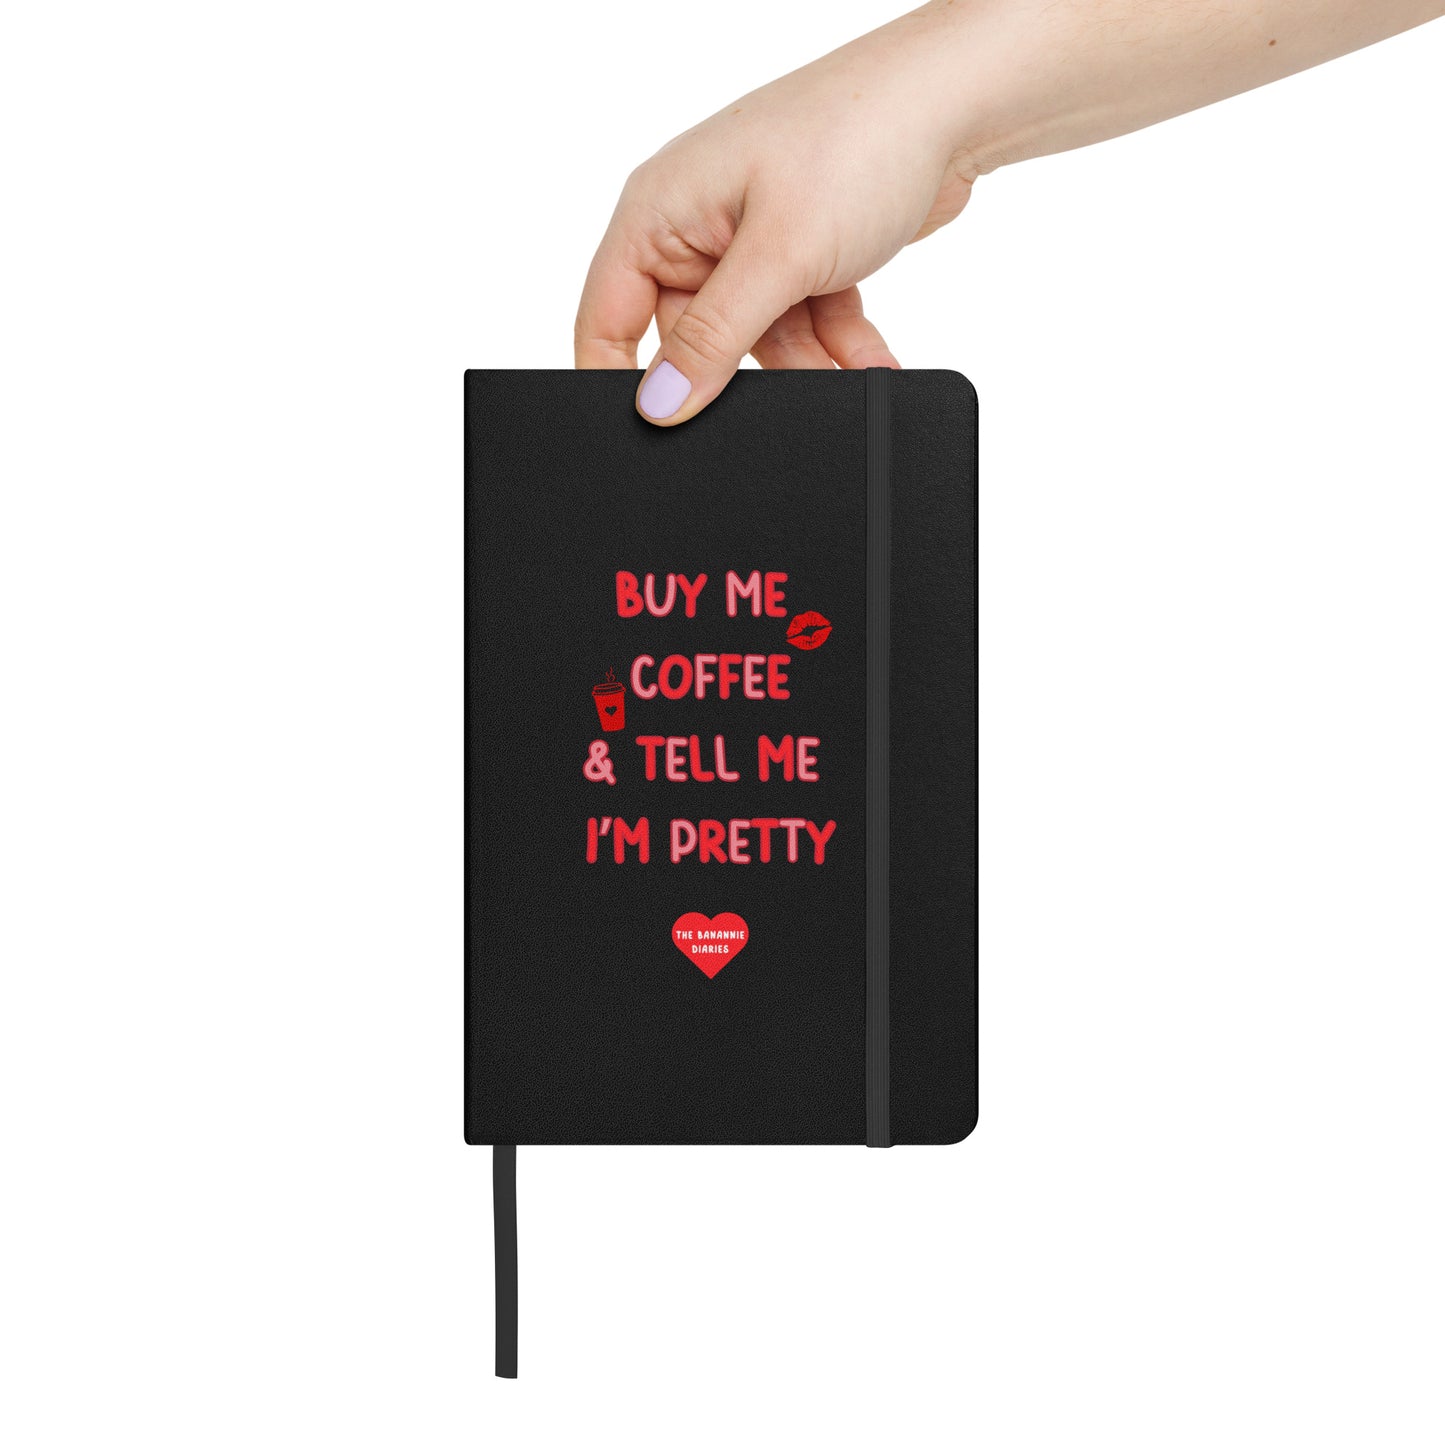 Buy Me Coffee and Tell Me I'm Pretty - Hardcover Bound Notebook, 80 Pages , By The Banannie Diaries